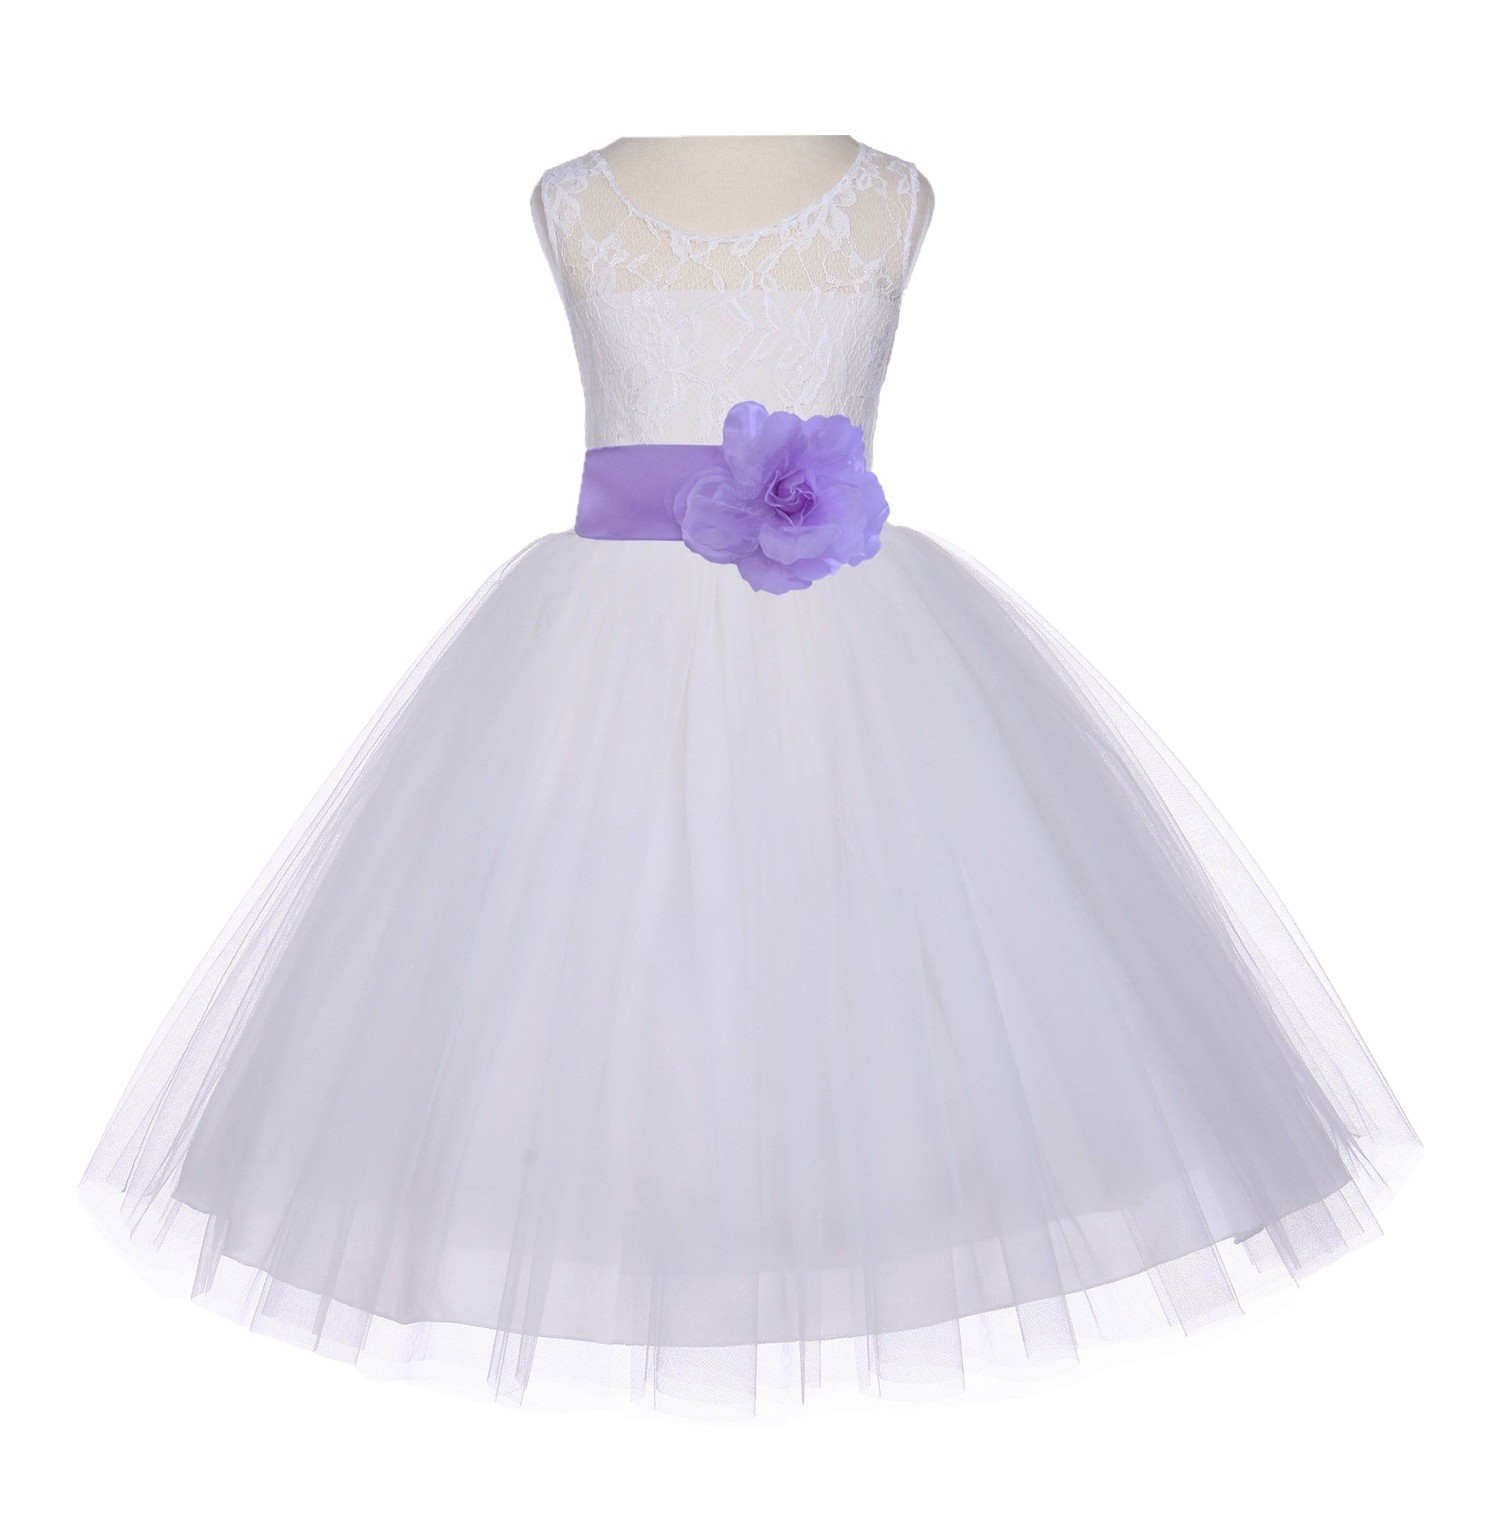 Ivory/Lilac Floral Lace Bodice Tulle Flower Girl Dress Bridesmaid 153S